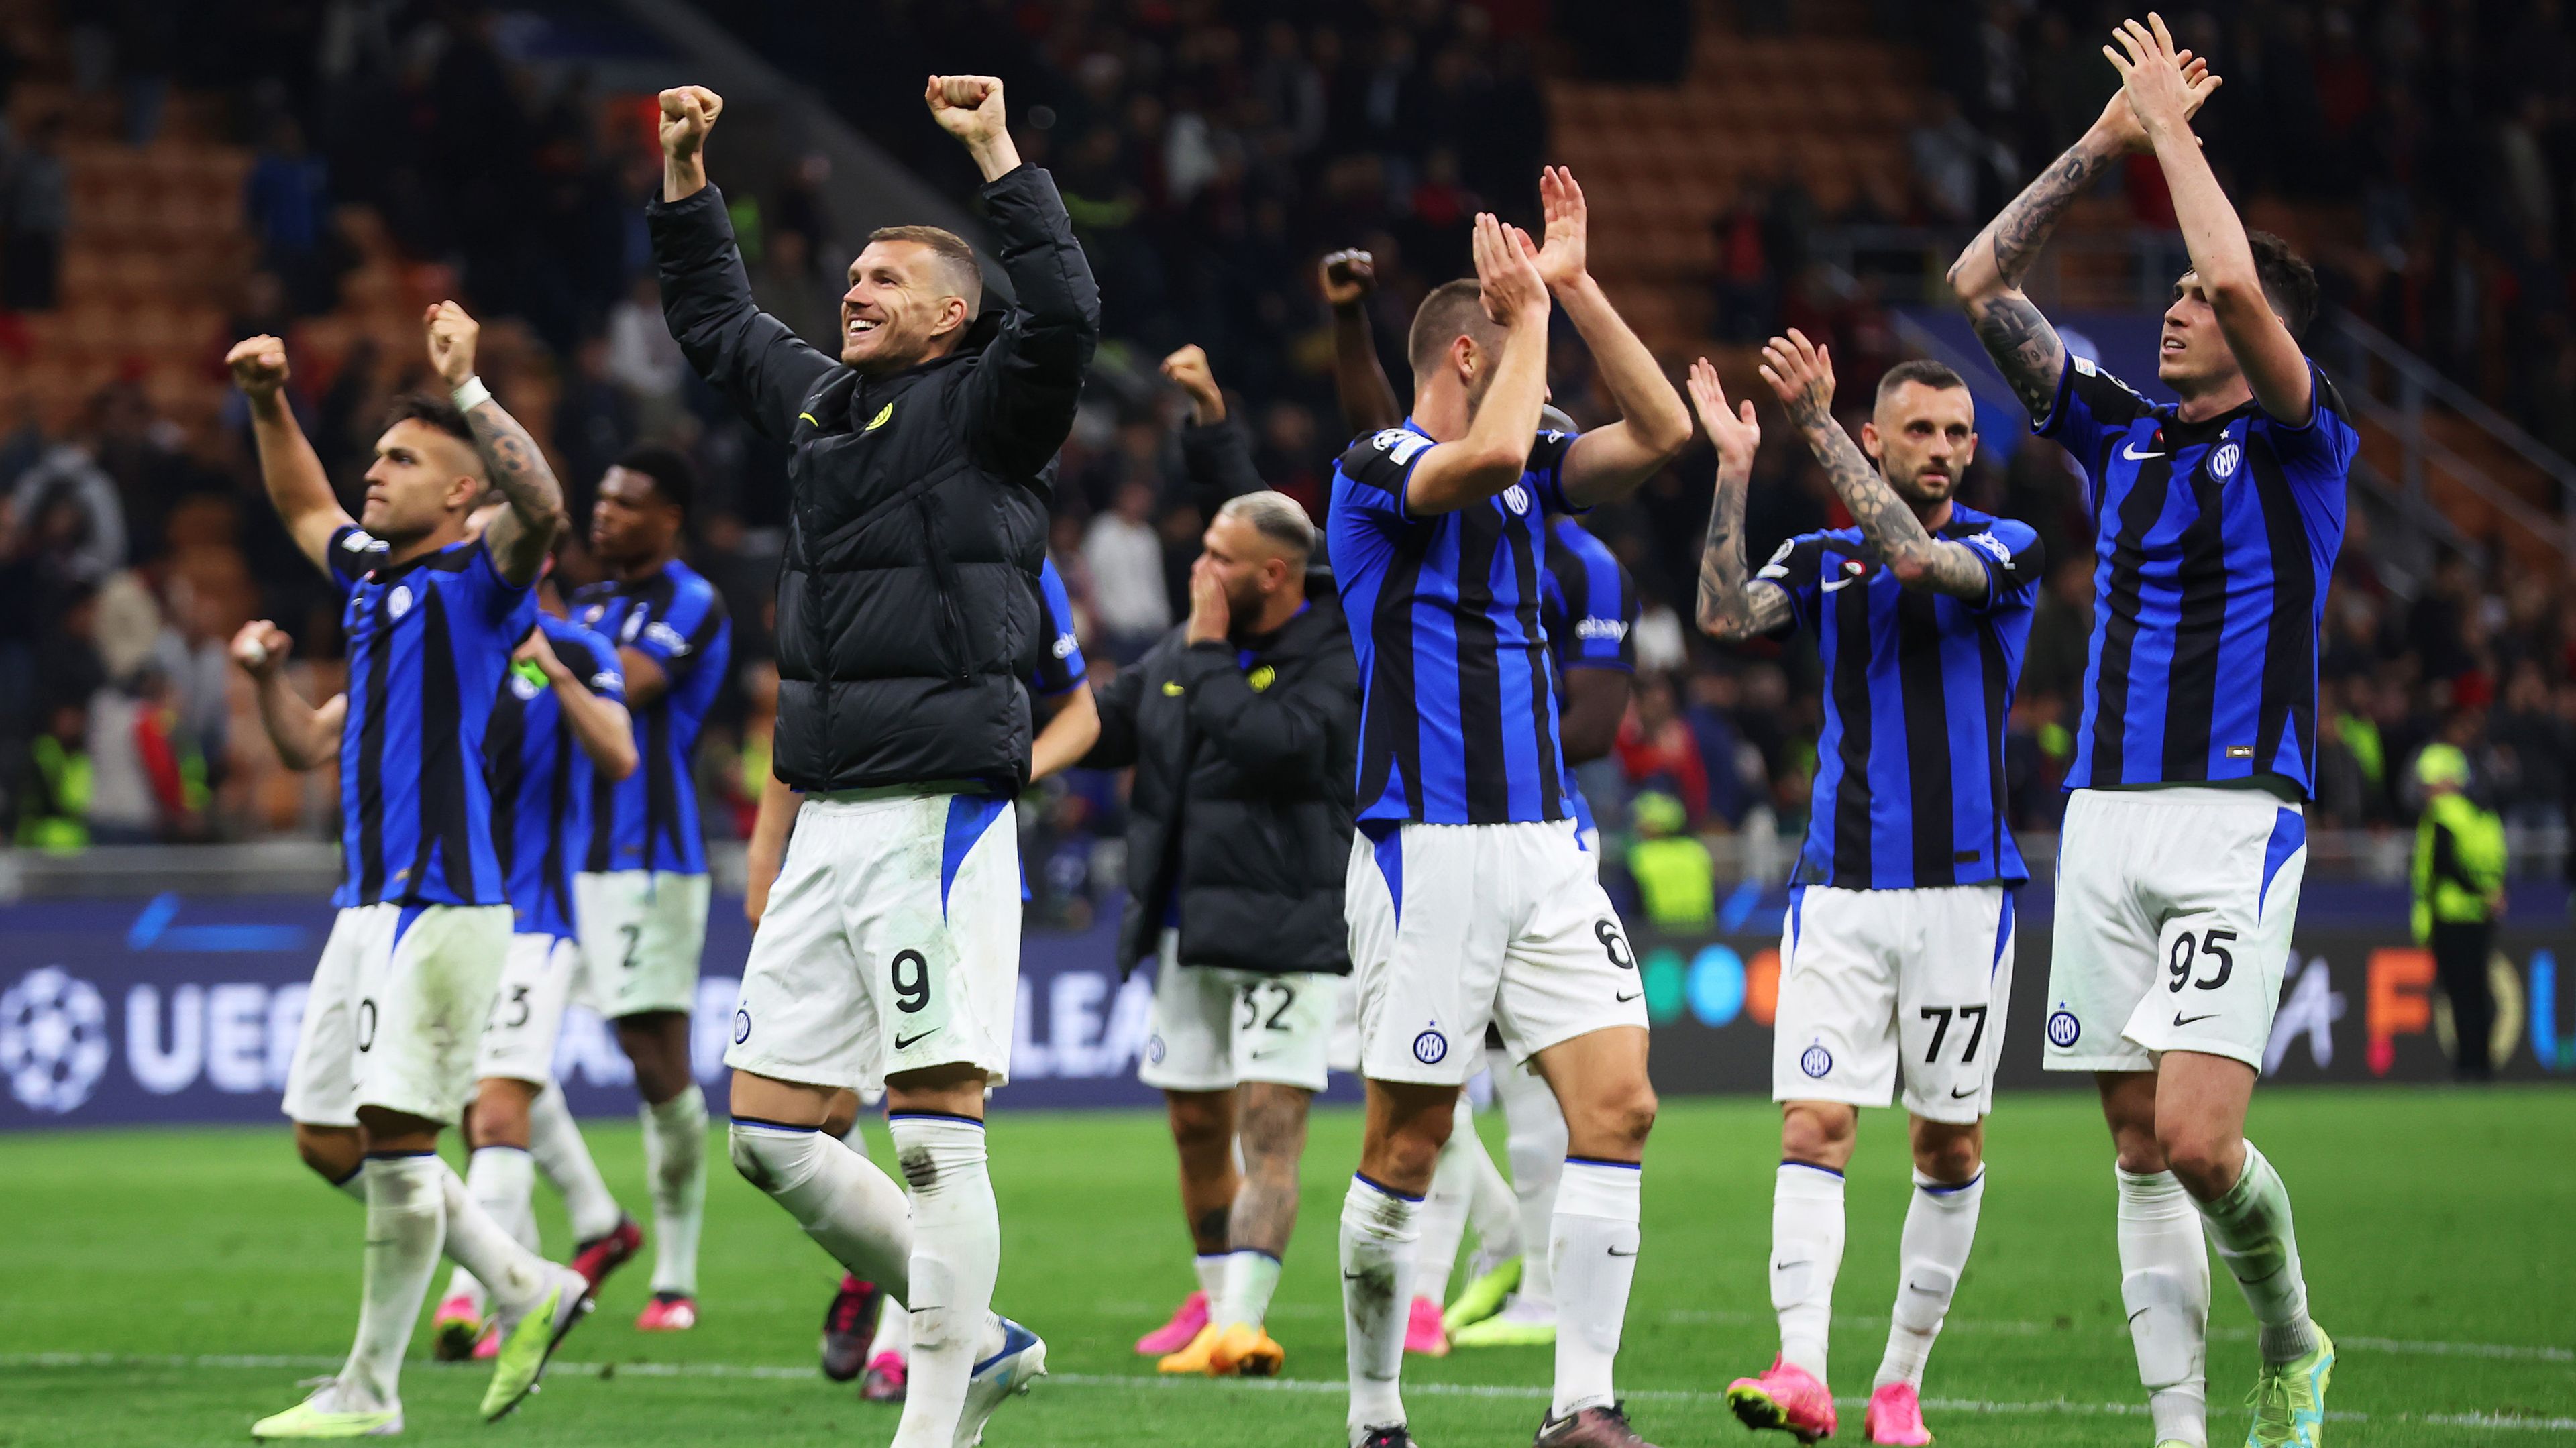 Inter players celebrate in front of their fans after the UEFA Champions League semi-final first leg match between AC Milan and FC Internazionale.